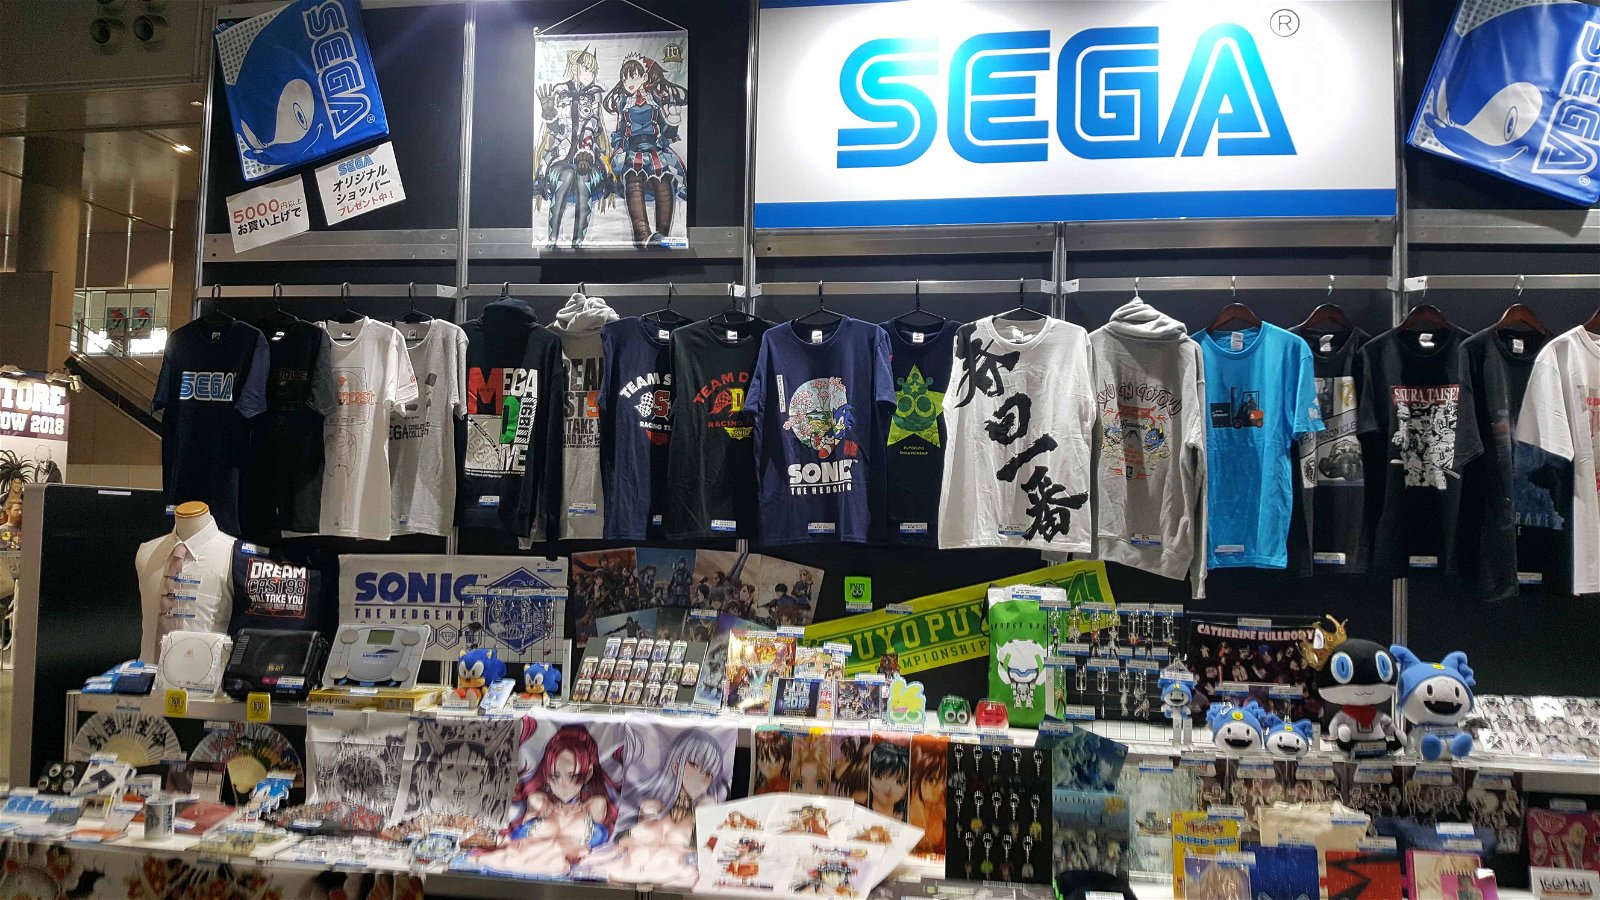 From Valkyria Chronicles To Sonic To Persona, Sega'S Booth Had It All